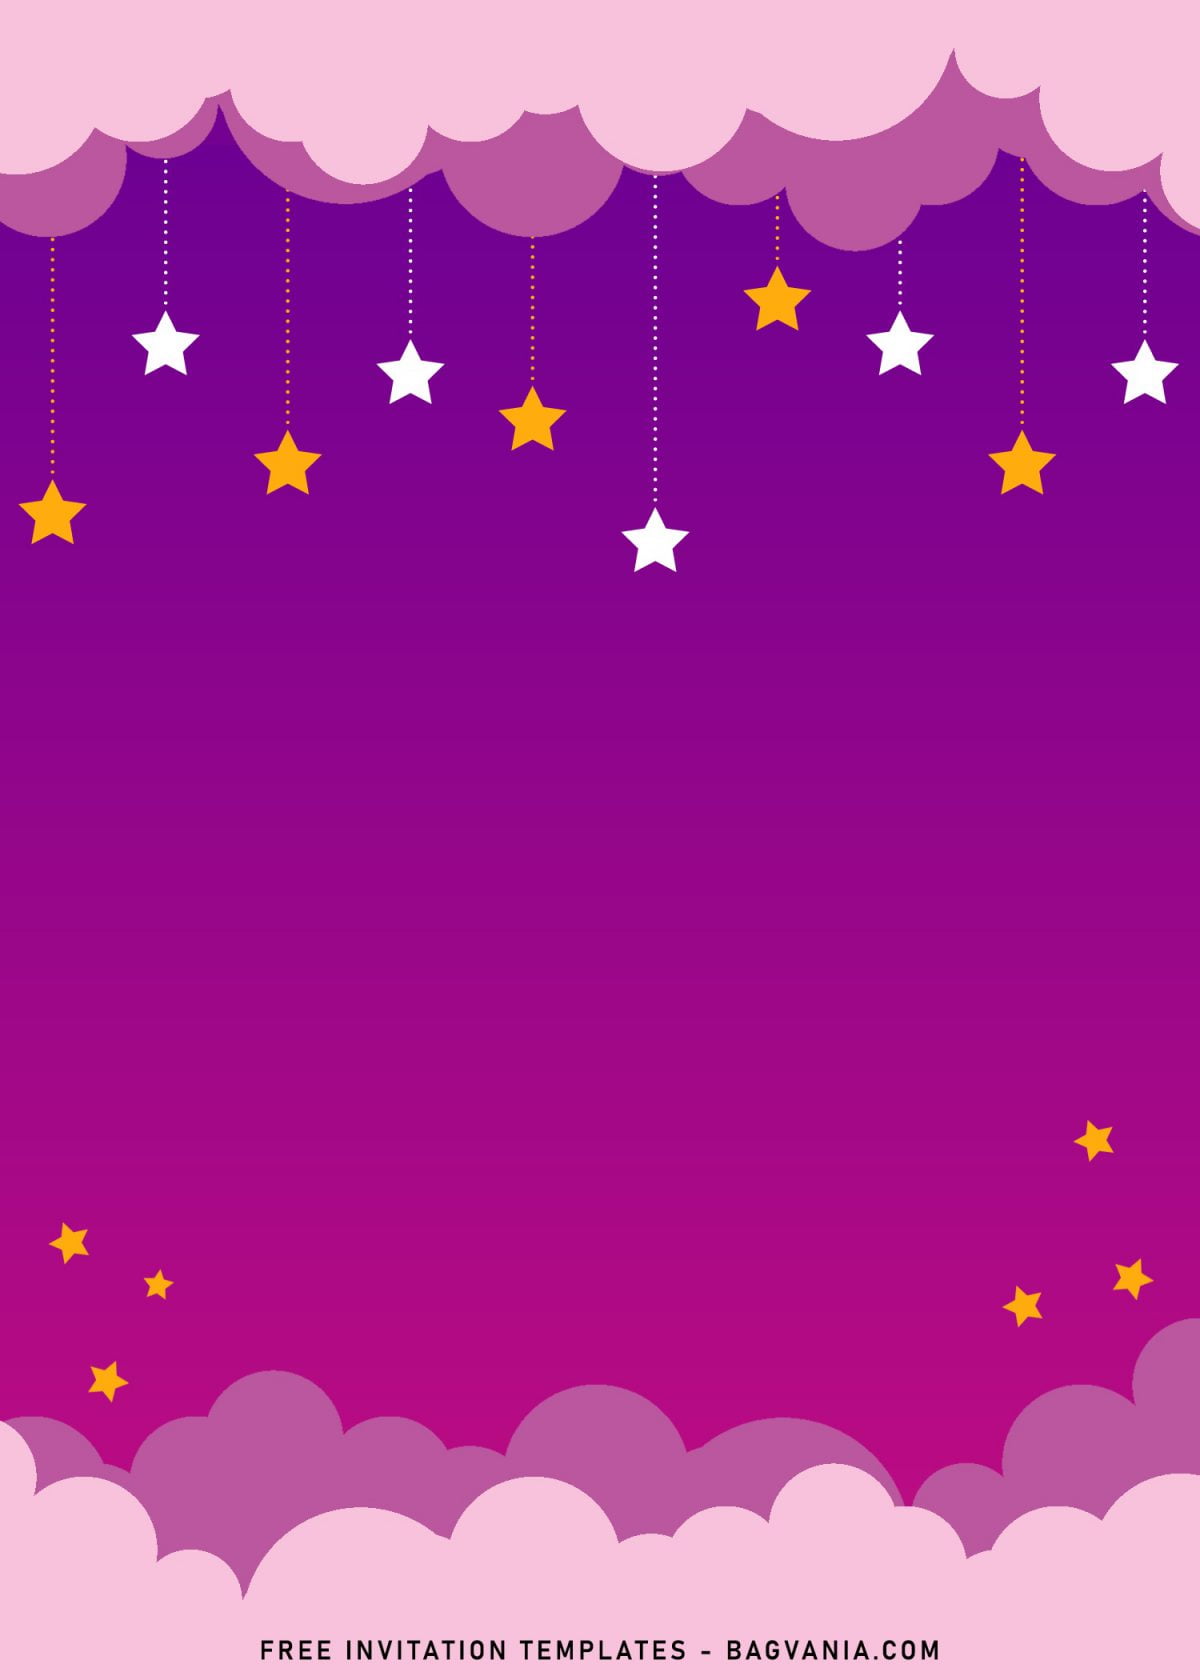 10+ Twinkle Twinkle Little Star Birthday Invitation Templates and has sparkling brightly stars hangs to the clouds